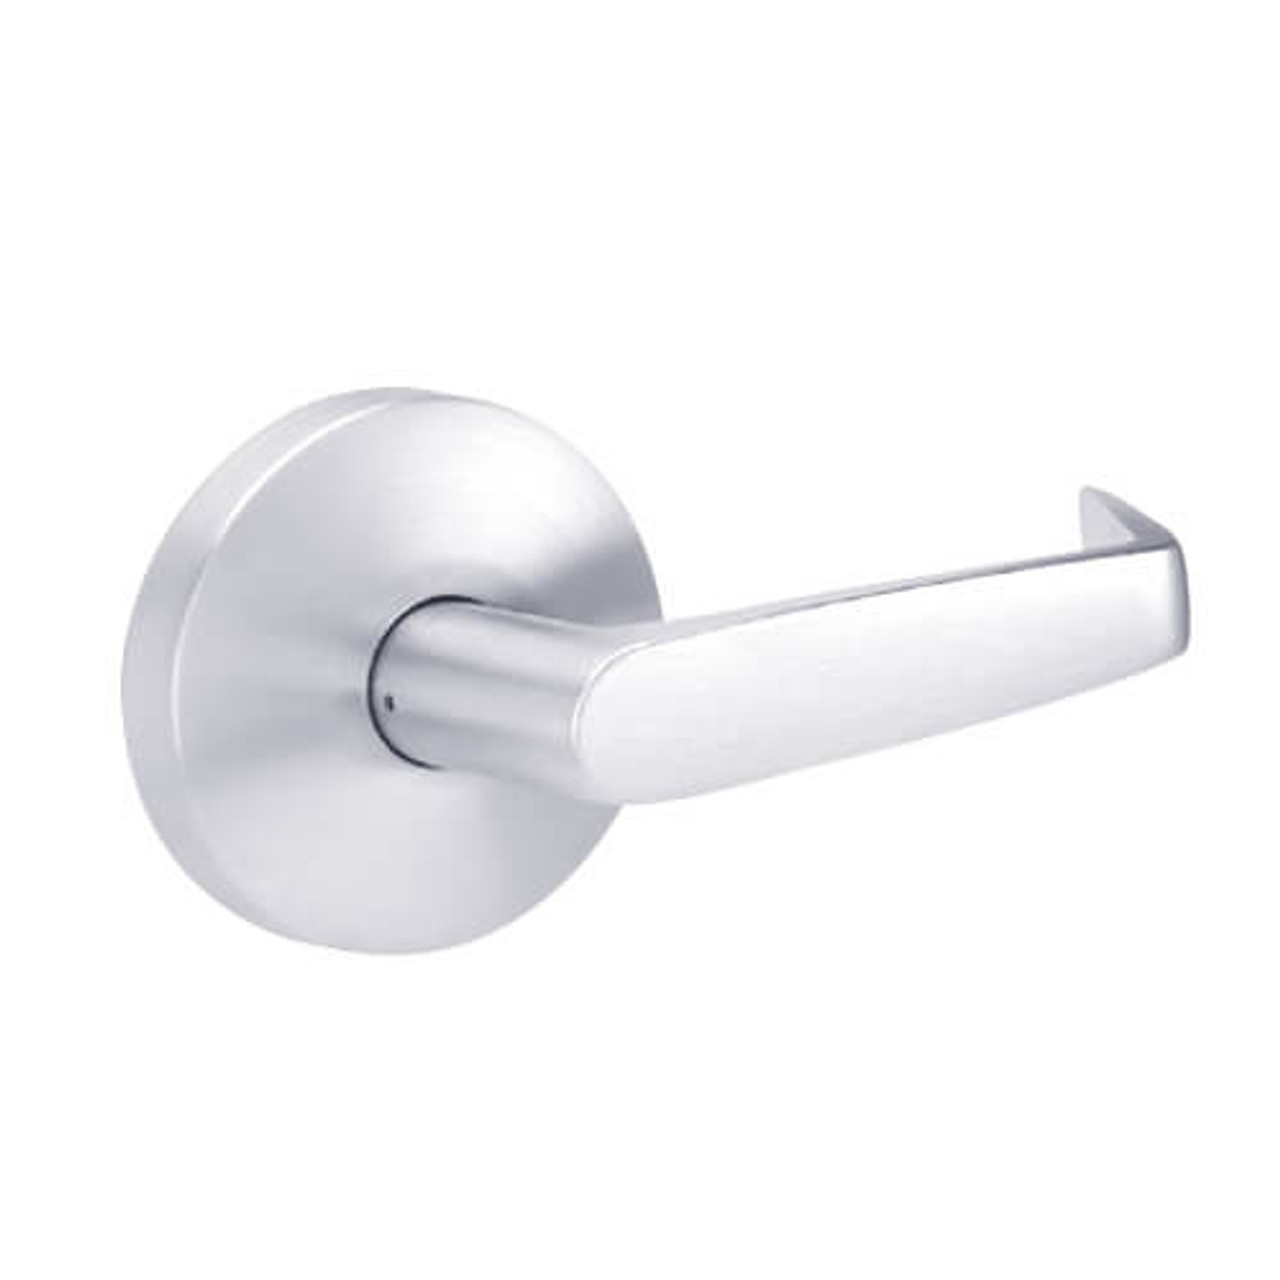 W12-D-625 Falcon W Series Cylindrical Half Dummy with Dane Lever Style in Bright Chrome Finish